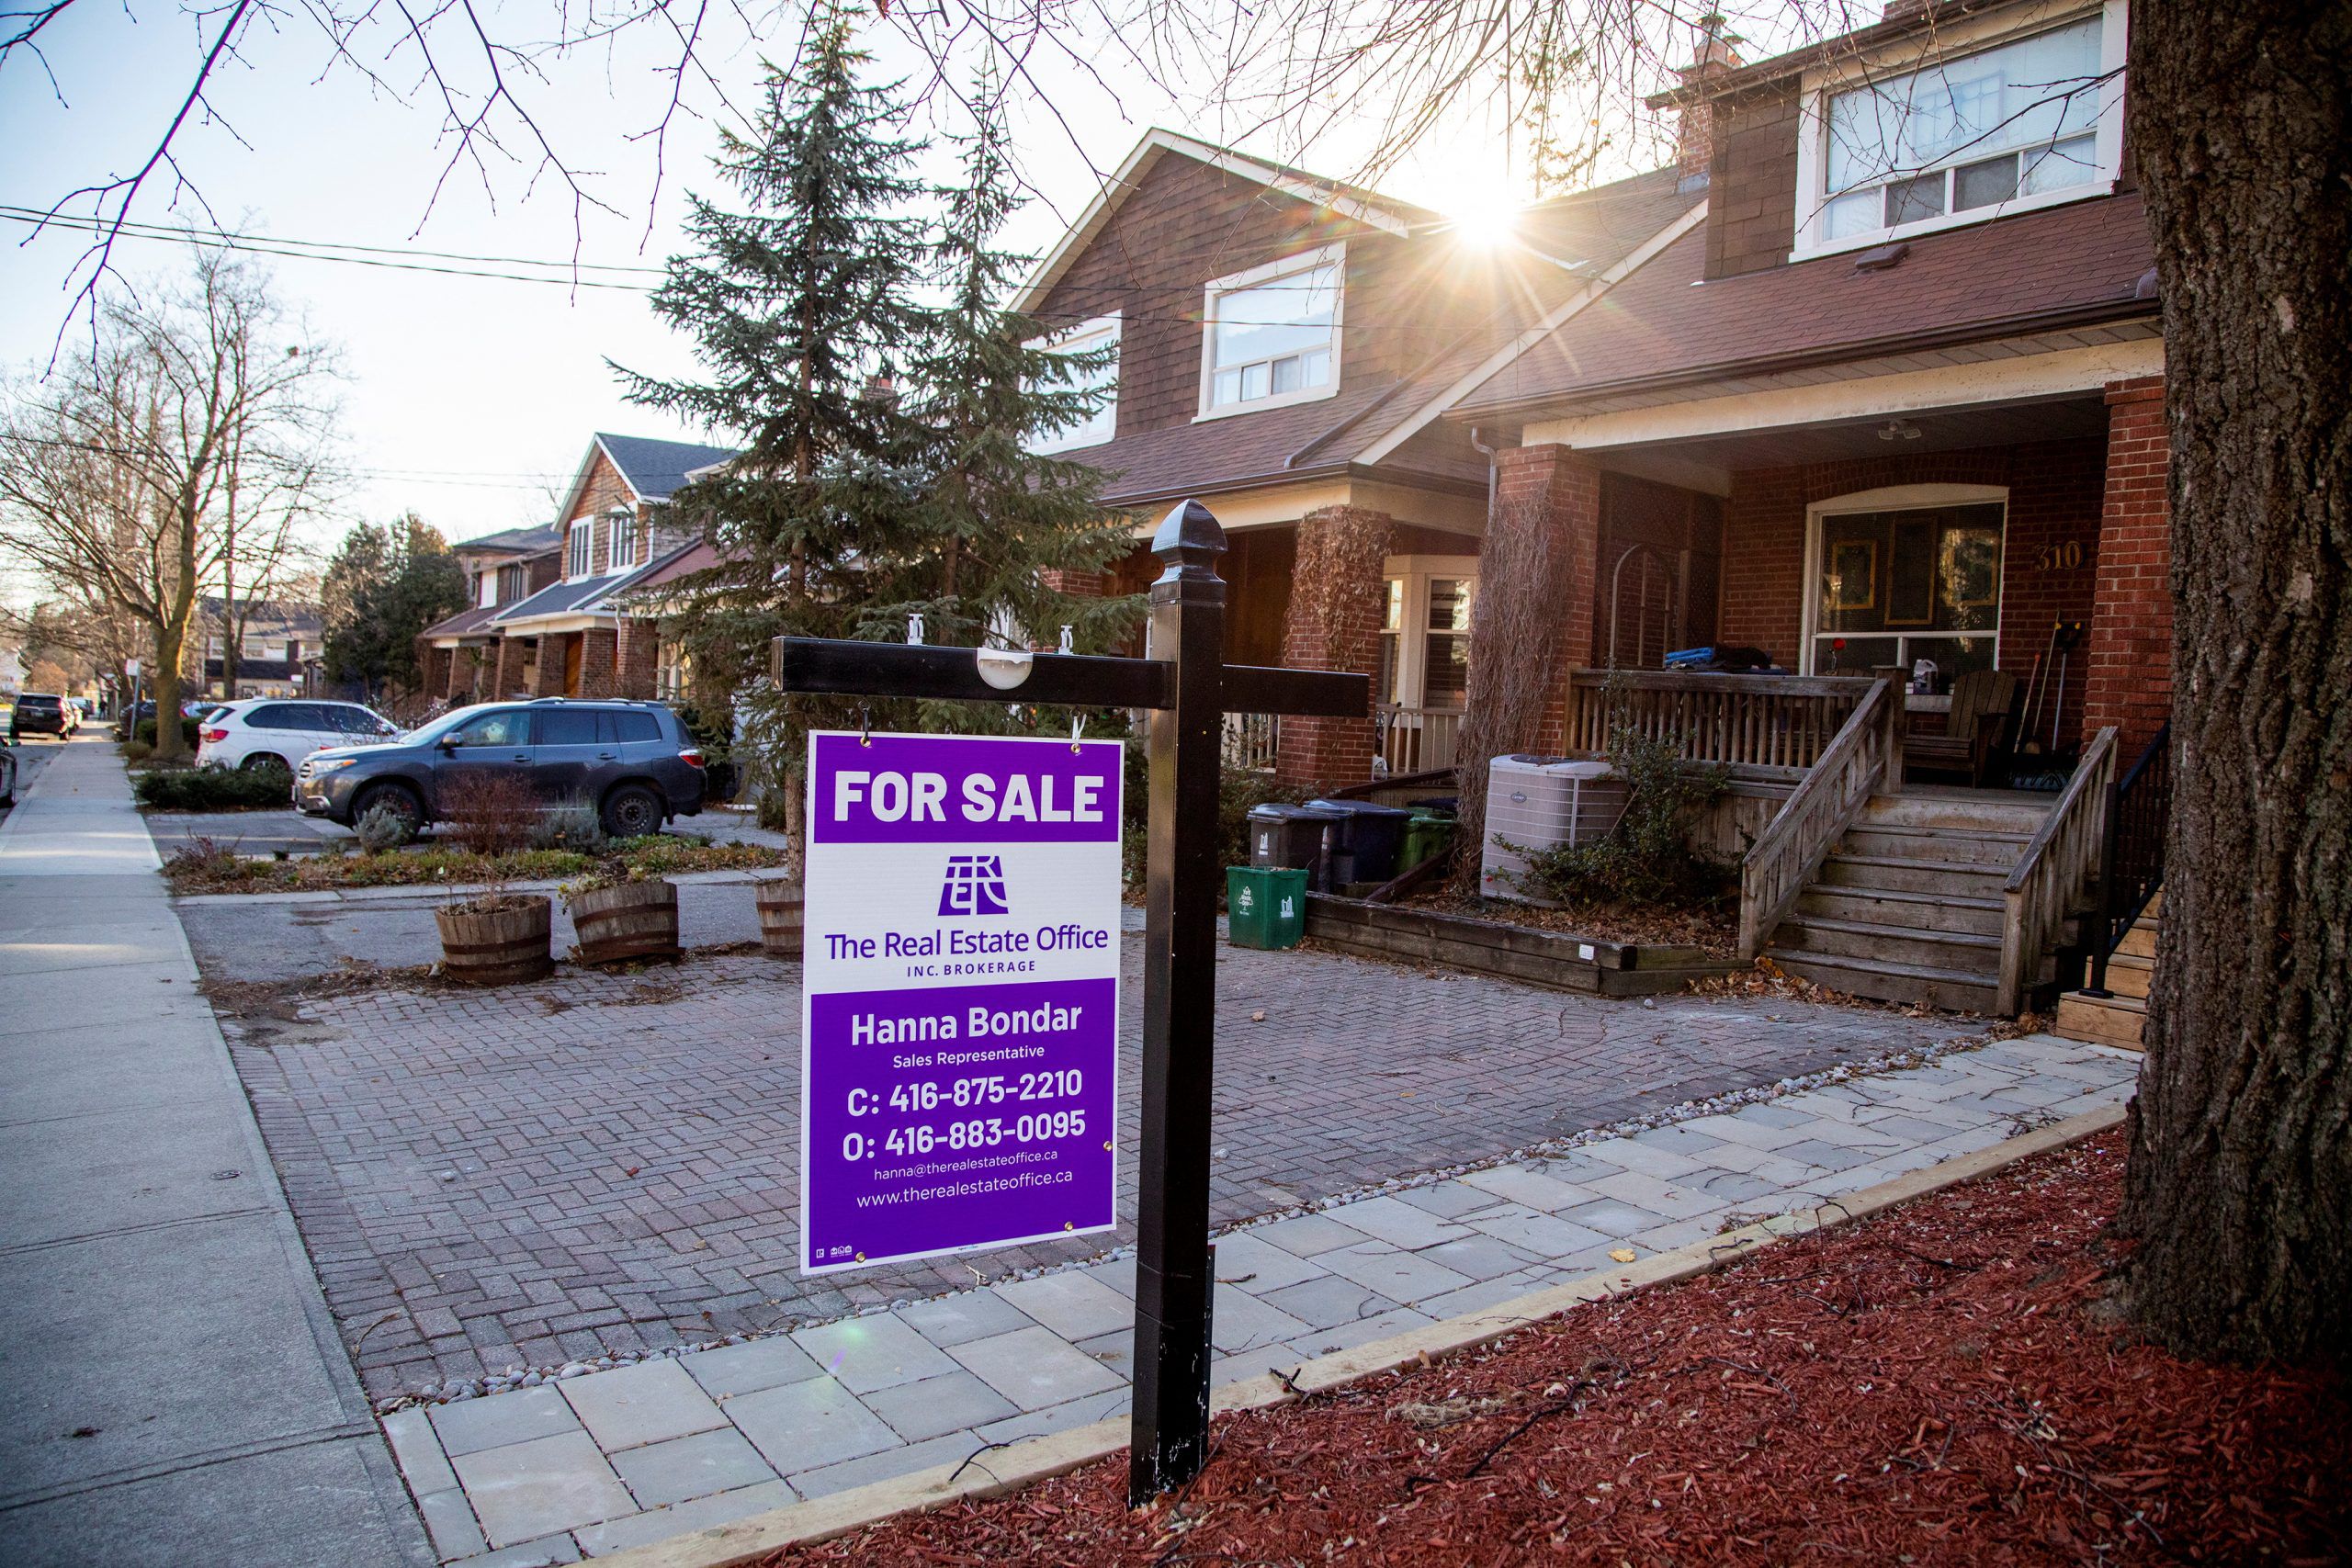 Housing markets in Canada continue to defy gravity and the pandemic